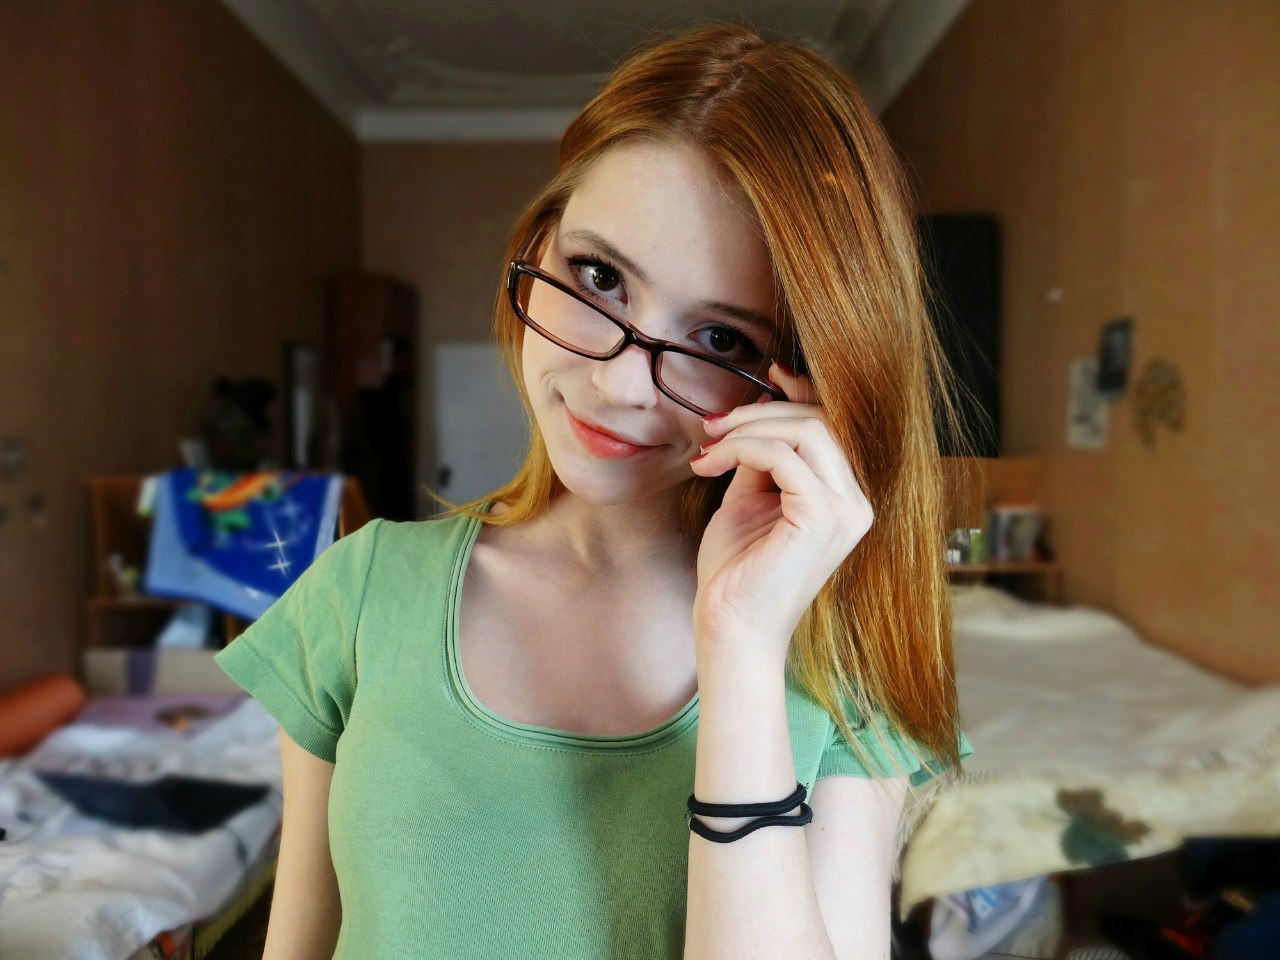 Myfreecams redhead pictures